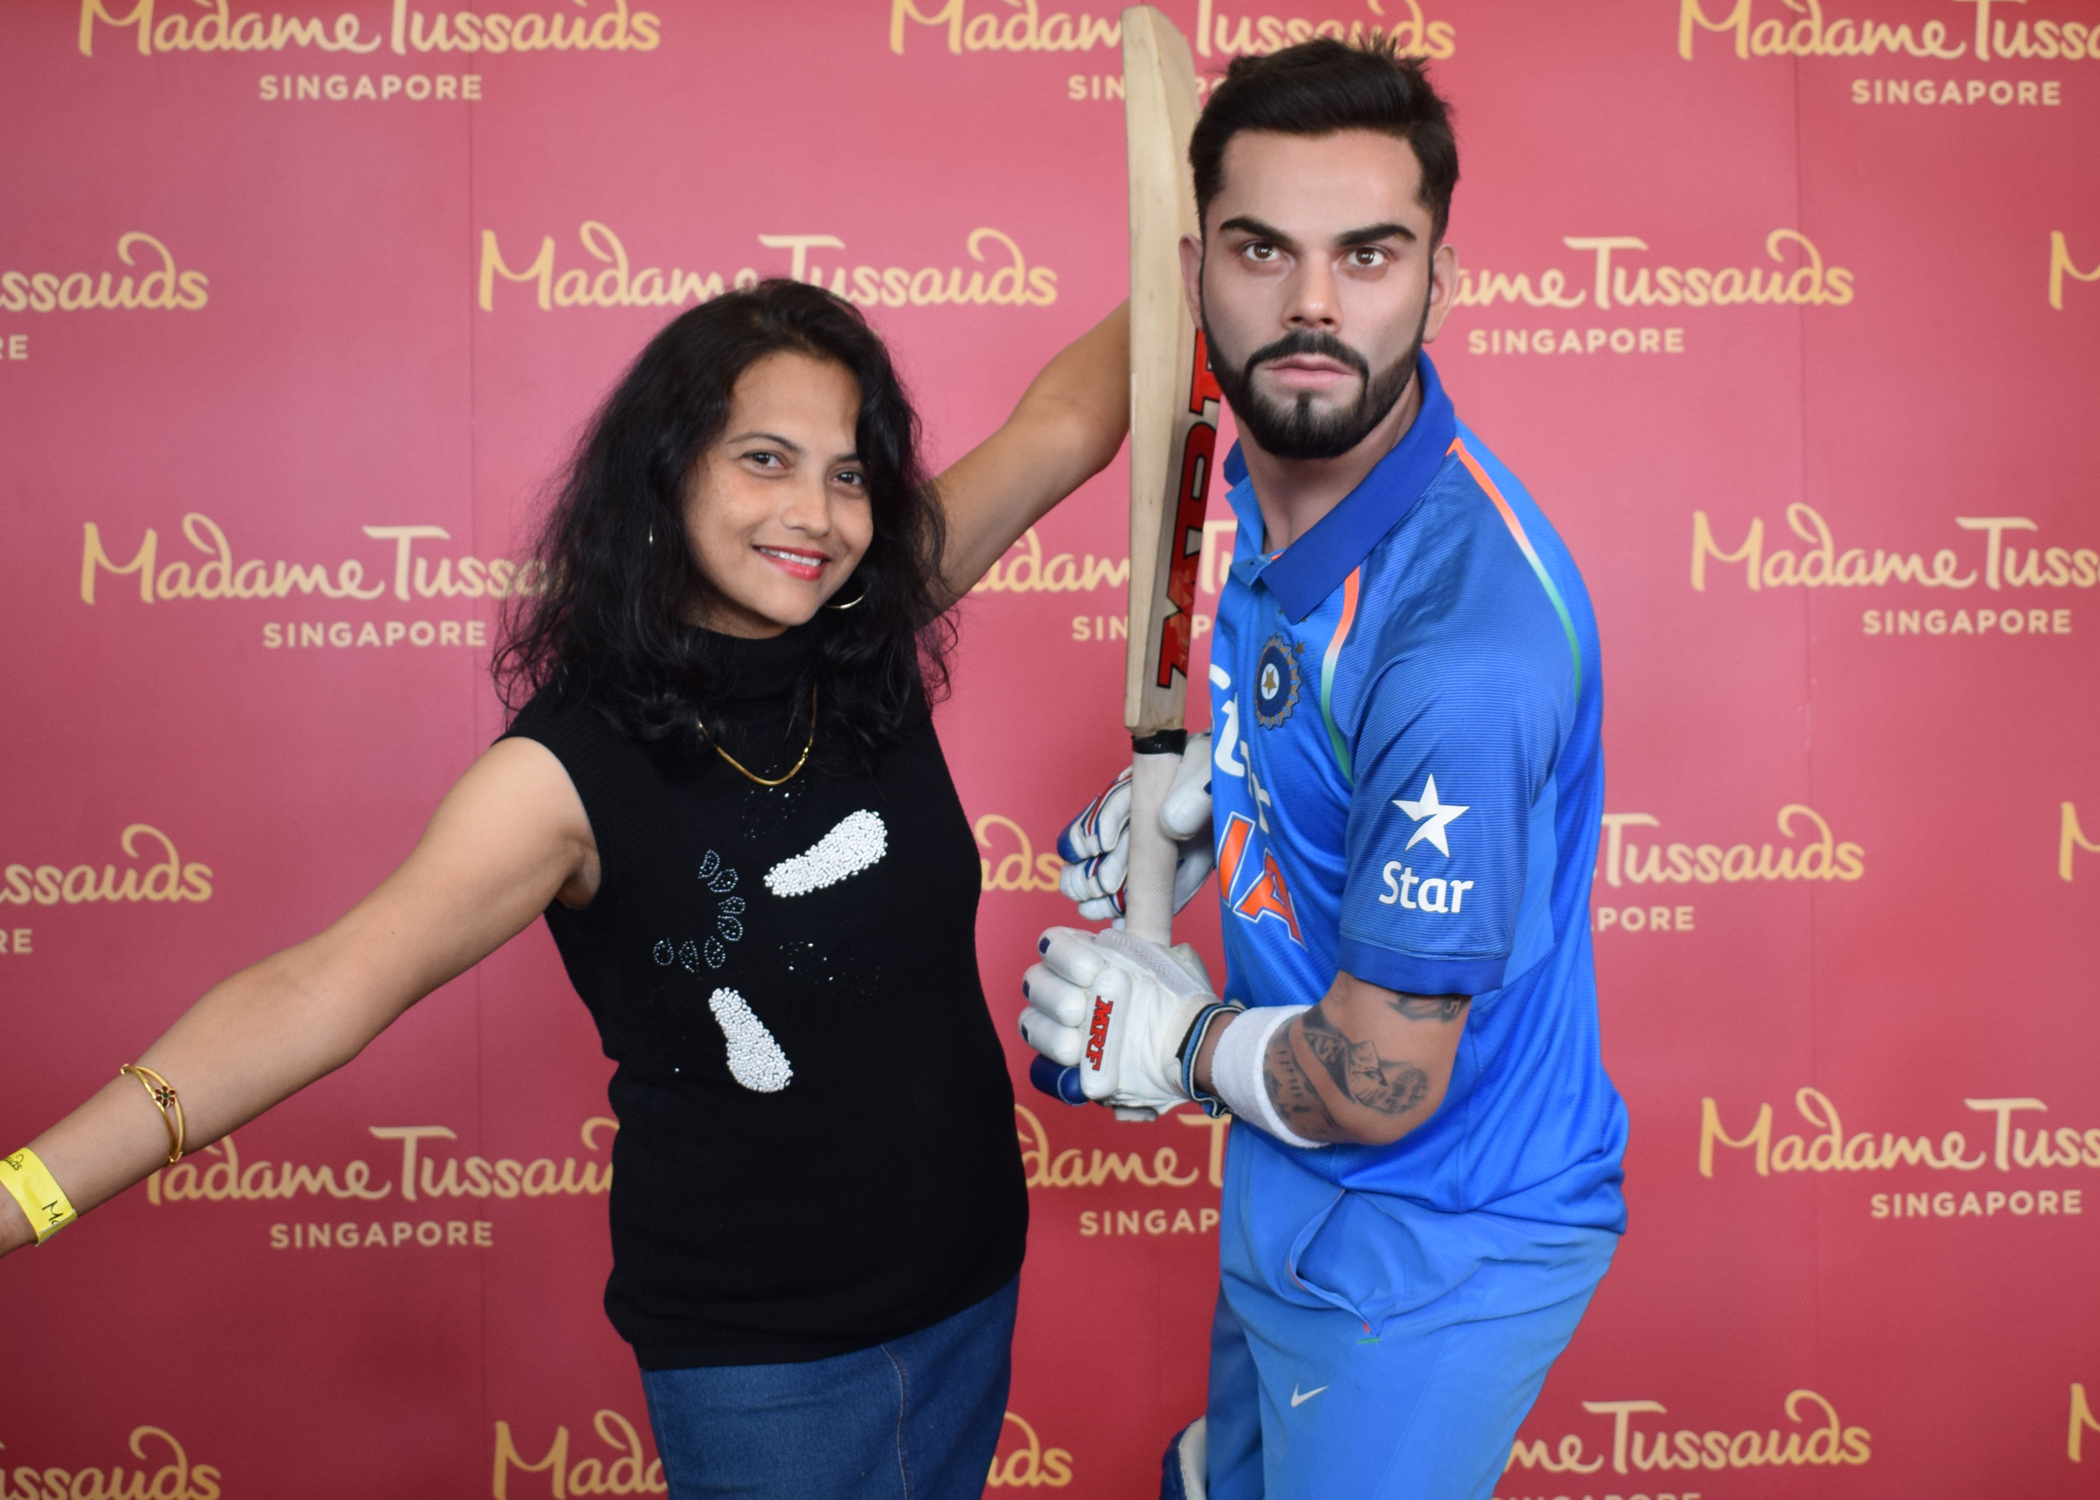  A female visitor poses with open arms beside Virat Kohli, one of India's best cricket player's wax figure in Madame Tussauds. The wax figure is in a batting stance with a bat in his hands and has a serious look.